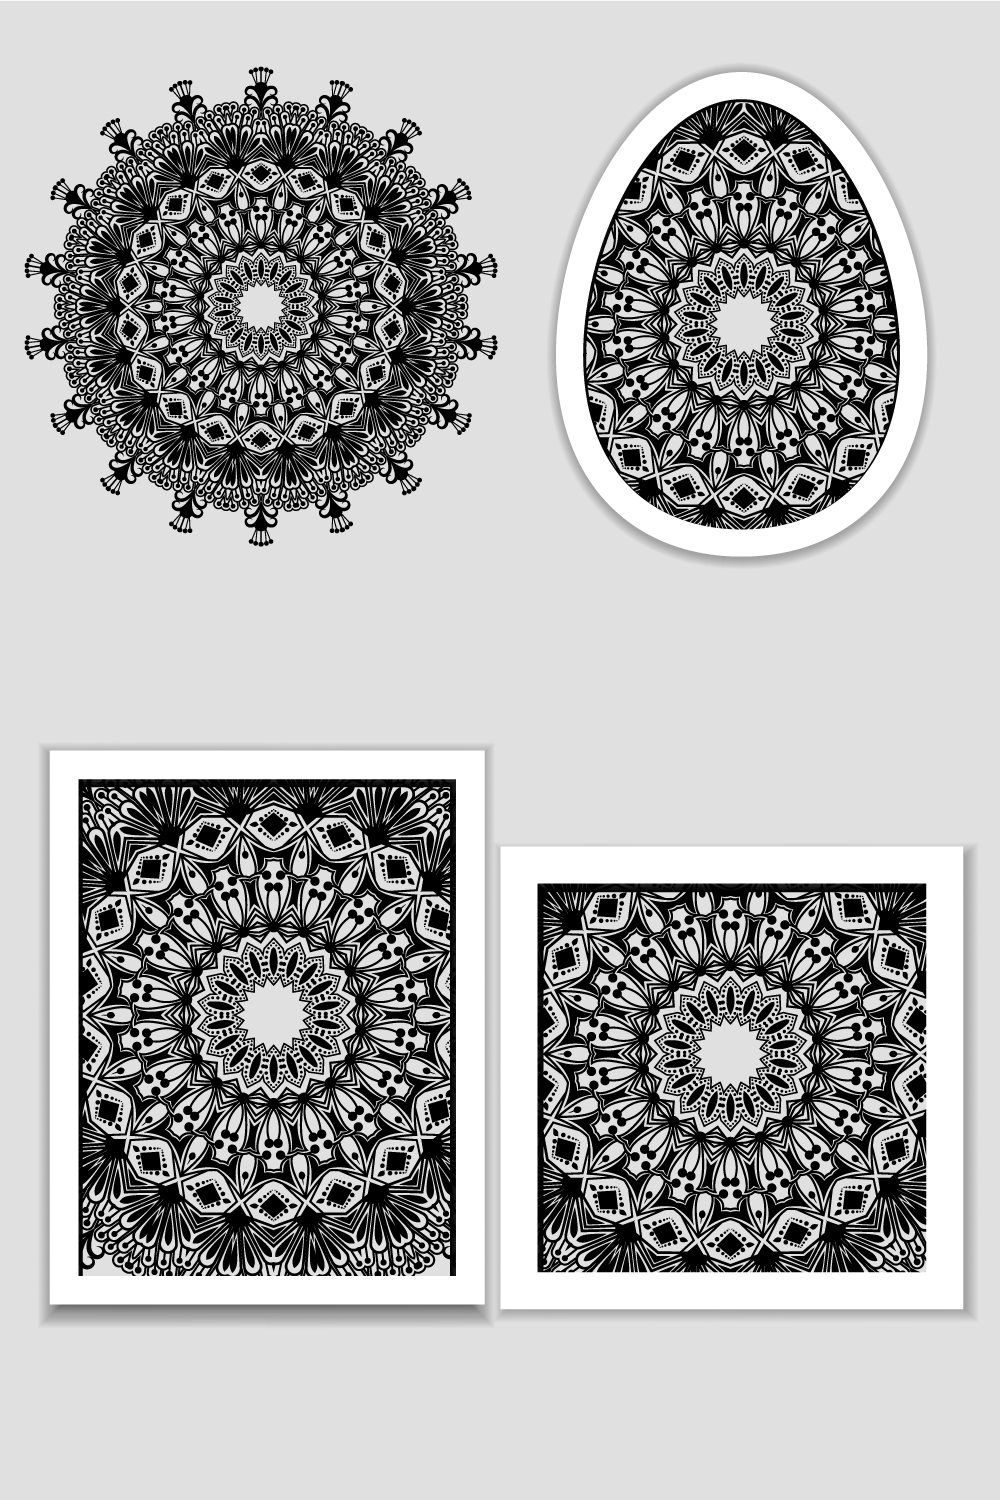 Abstract Design Of Mandala In Dot Paint Style Ethnic Round Ornament - Pinterest.